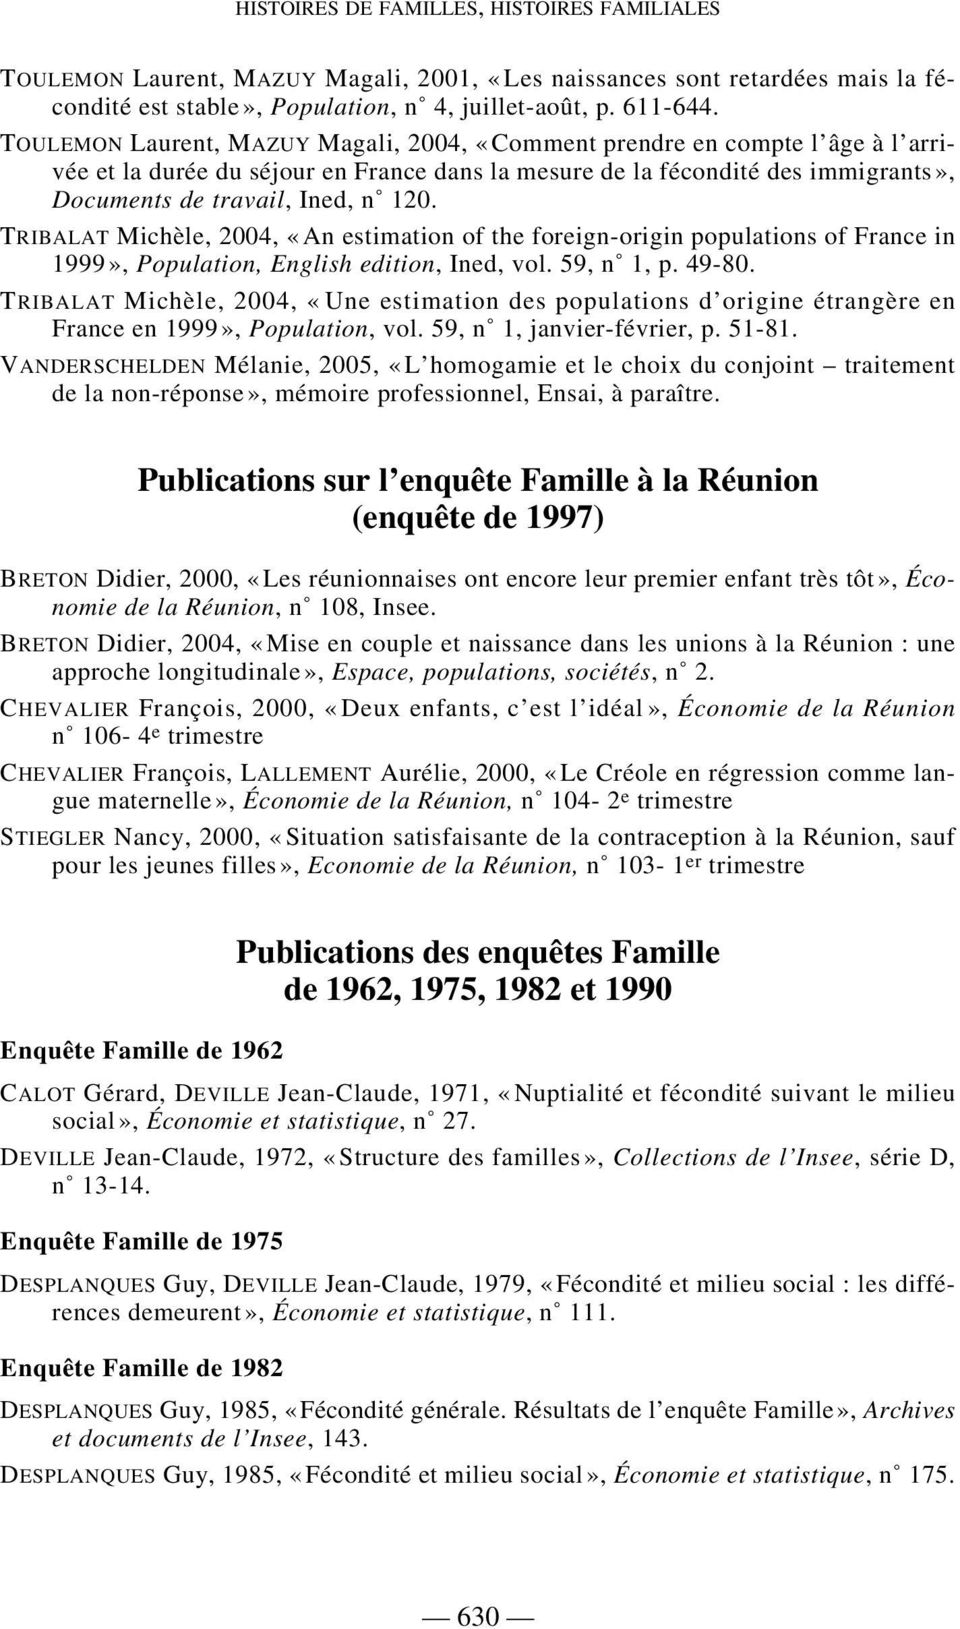 TRIBALAT Michèle, 2004, «An estimation of the foreign-origin populations of France in 1999», Population, English edition, Ined, vol. 59, n 1, p. 49-80.